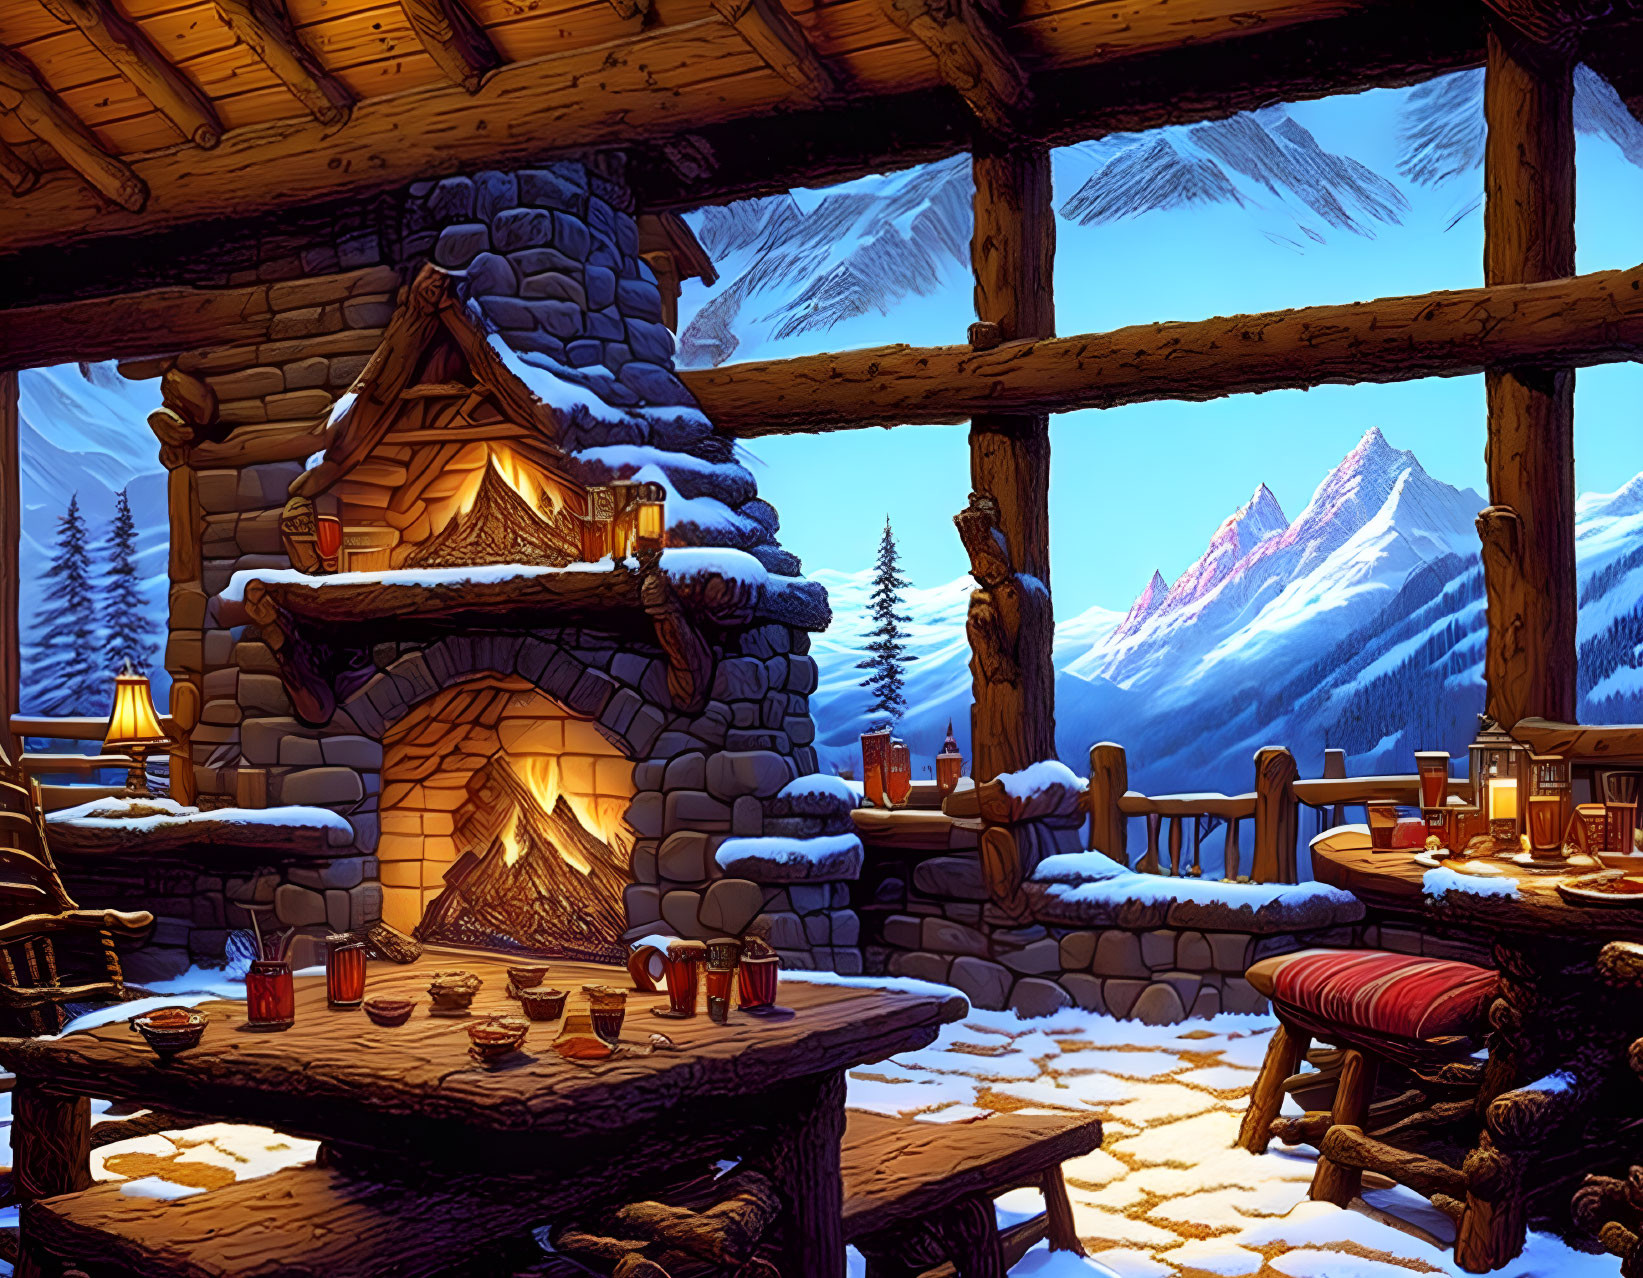 Snowy Mountain Cabin Interior with Fireplace & Wooden Furniture